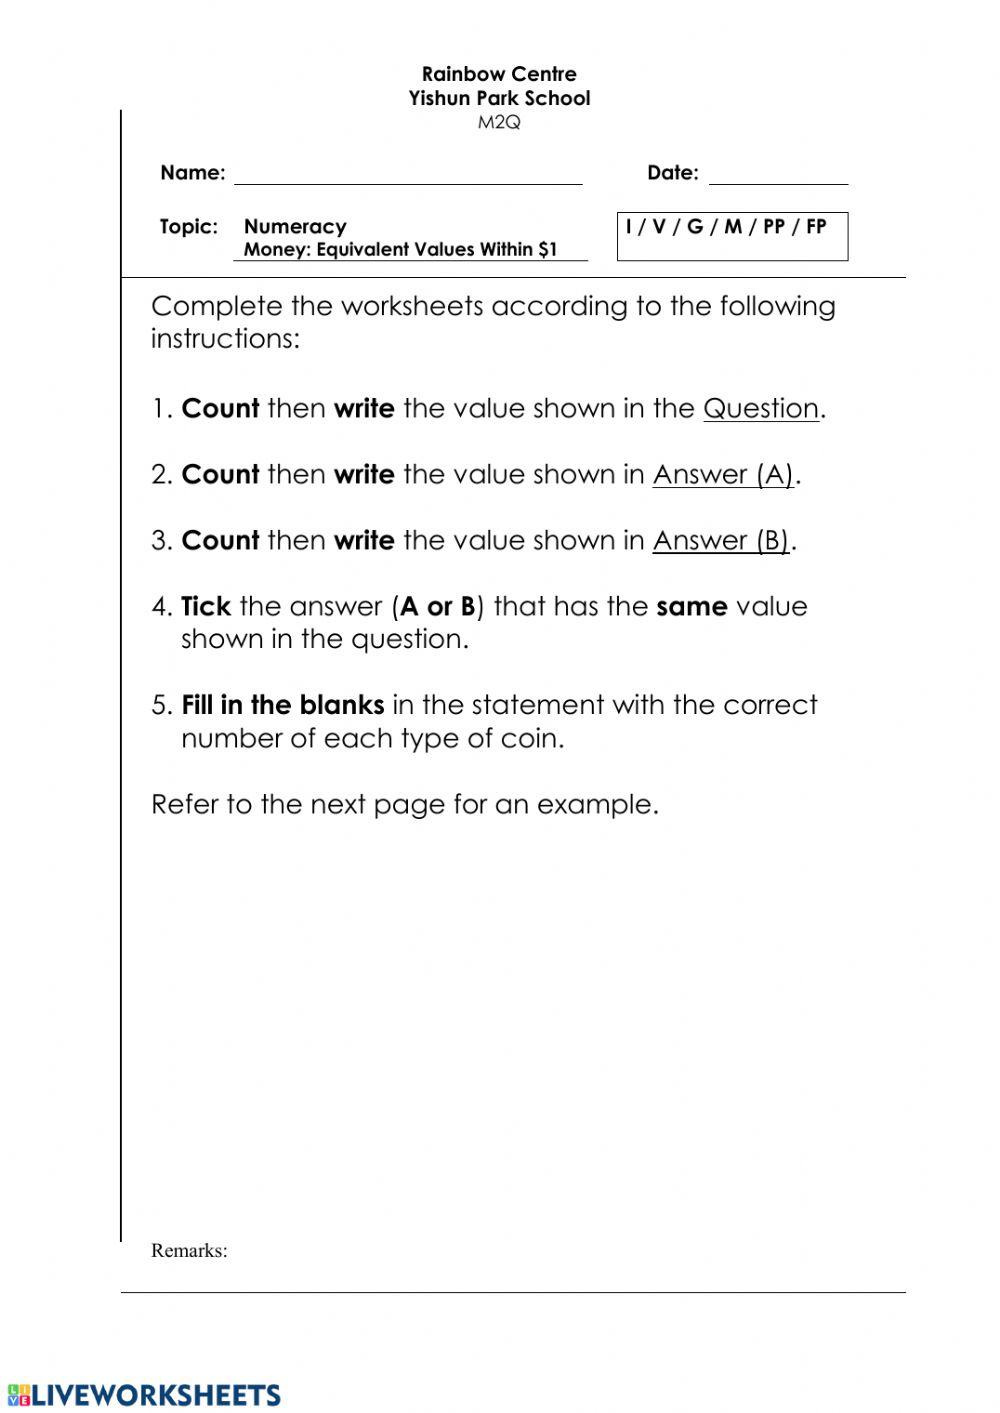 Money Writing + Tick Worksheet - Equivalent Values Within -1 D, L, Y 2 